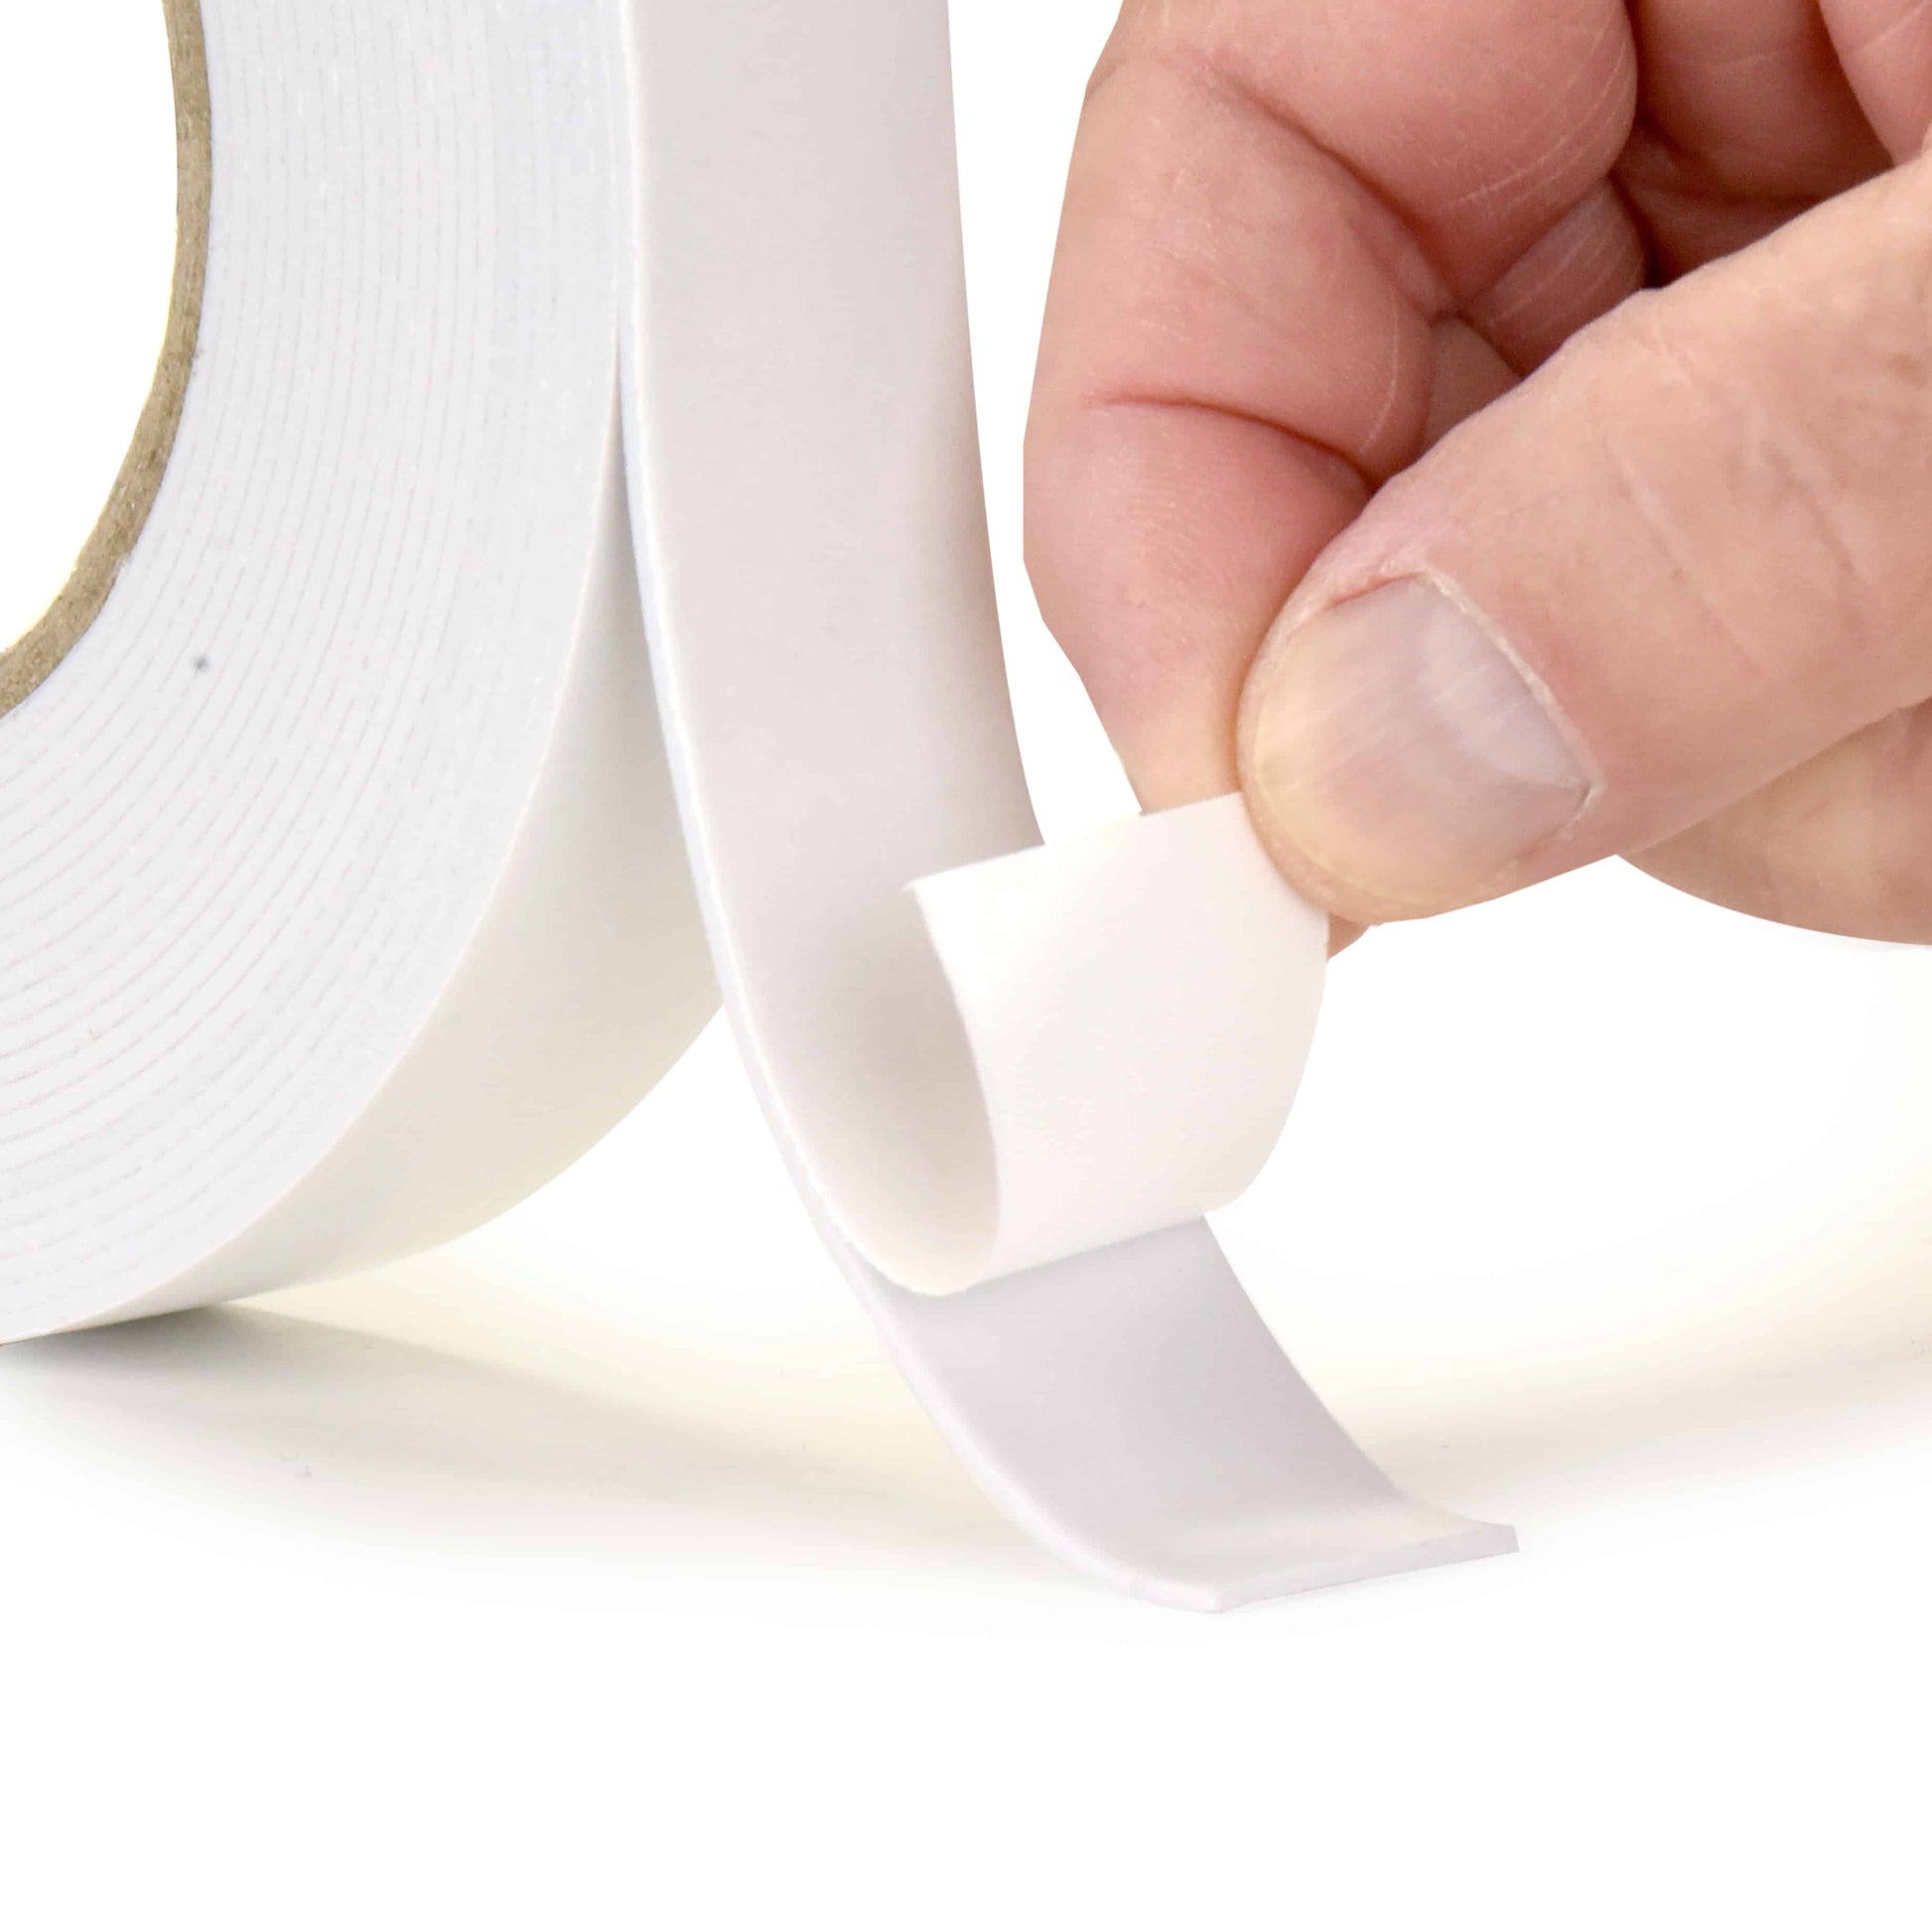 Double Sided Foam Tape, Double Sided Mounting Tape